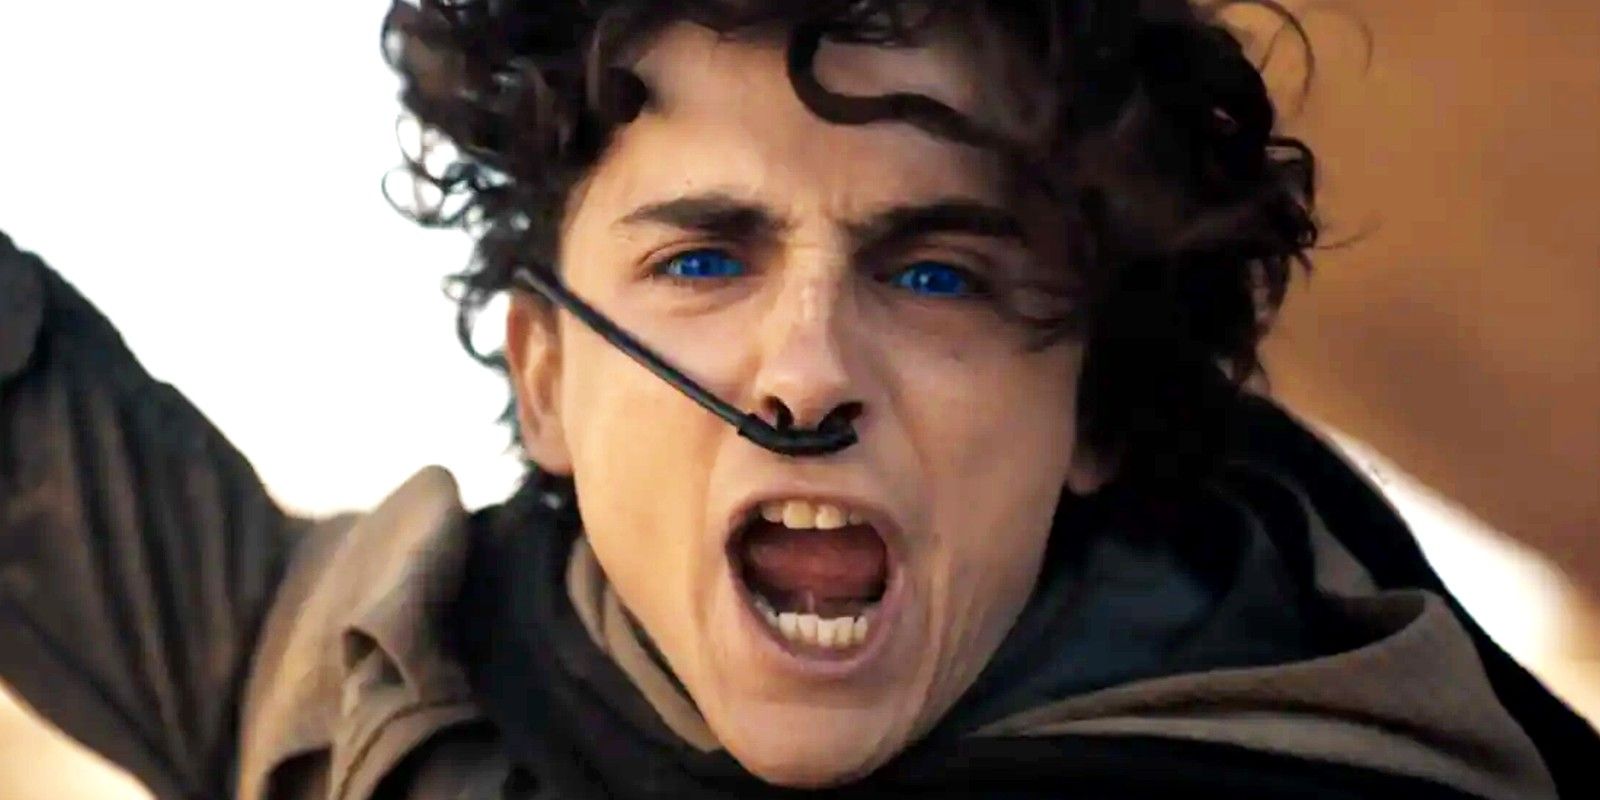 Paul Atreides played by Timothée Chalamet streaming in front of the Fremen in Dune 2, establishing his role as their messiah